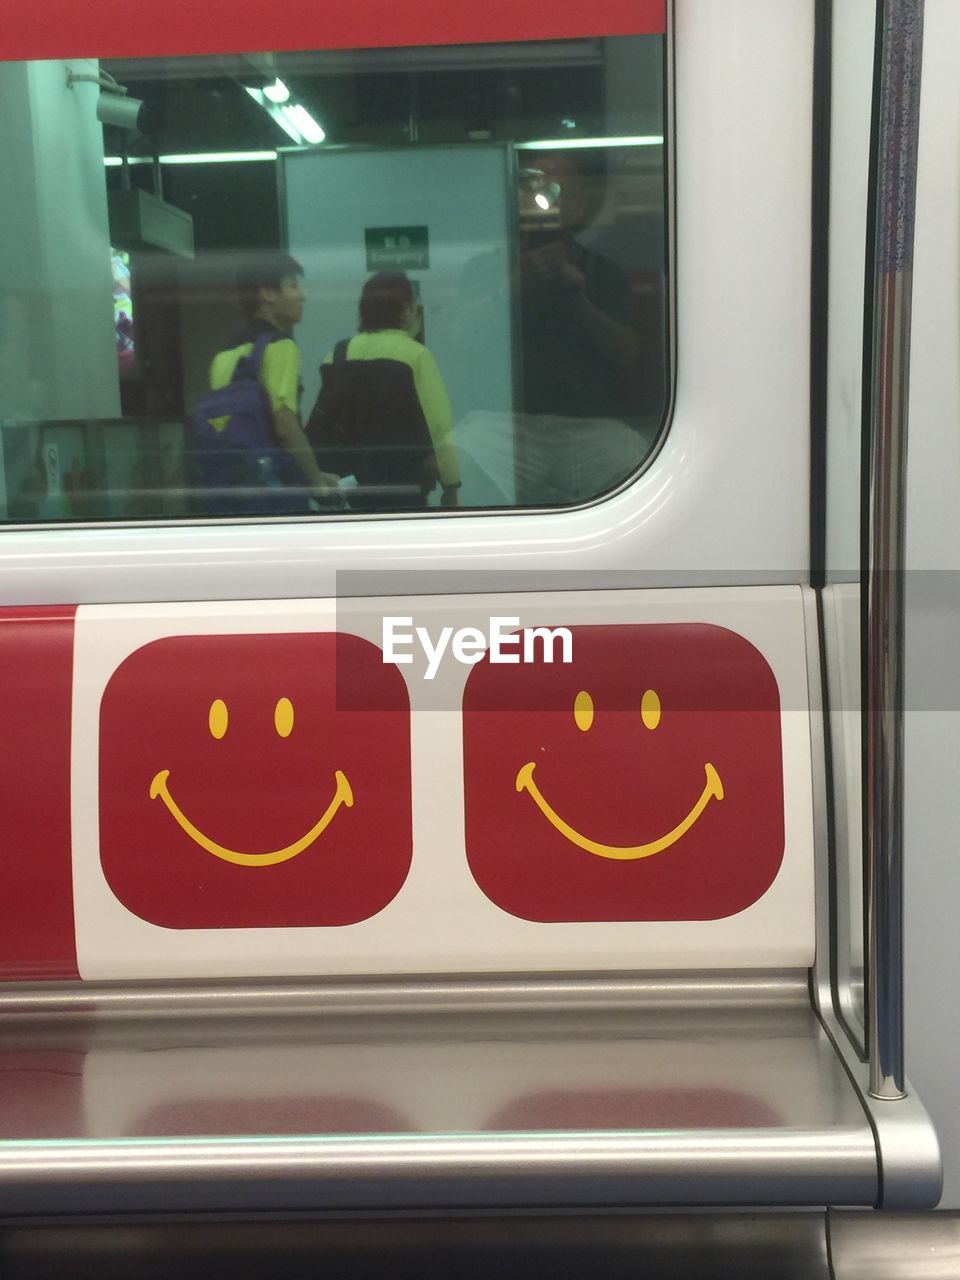 Smiley faces on seats